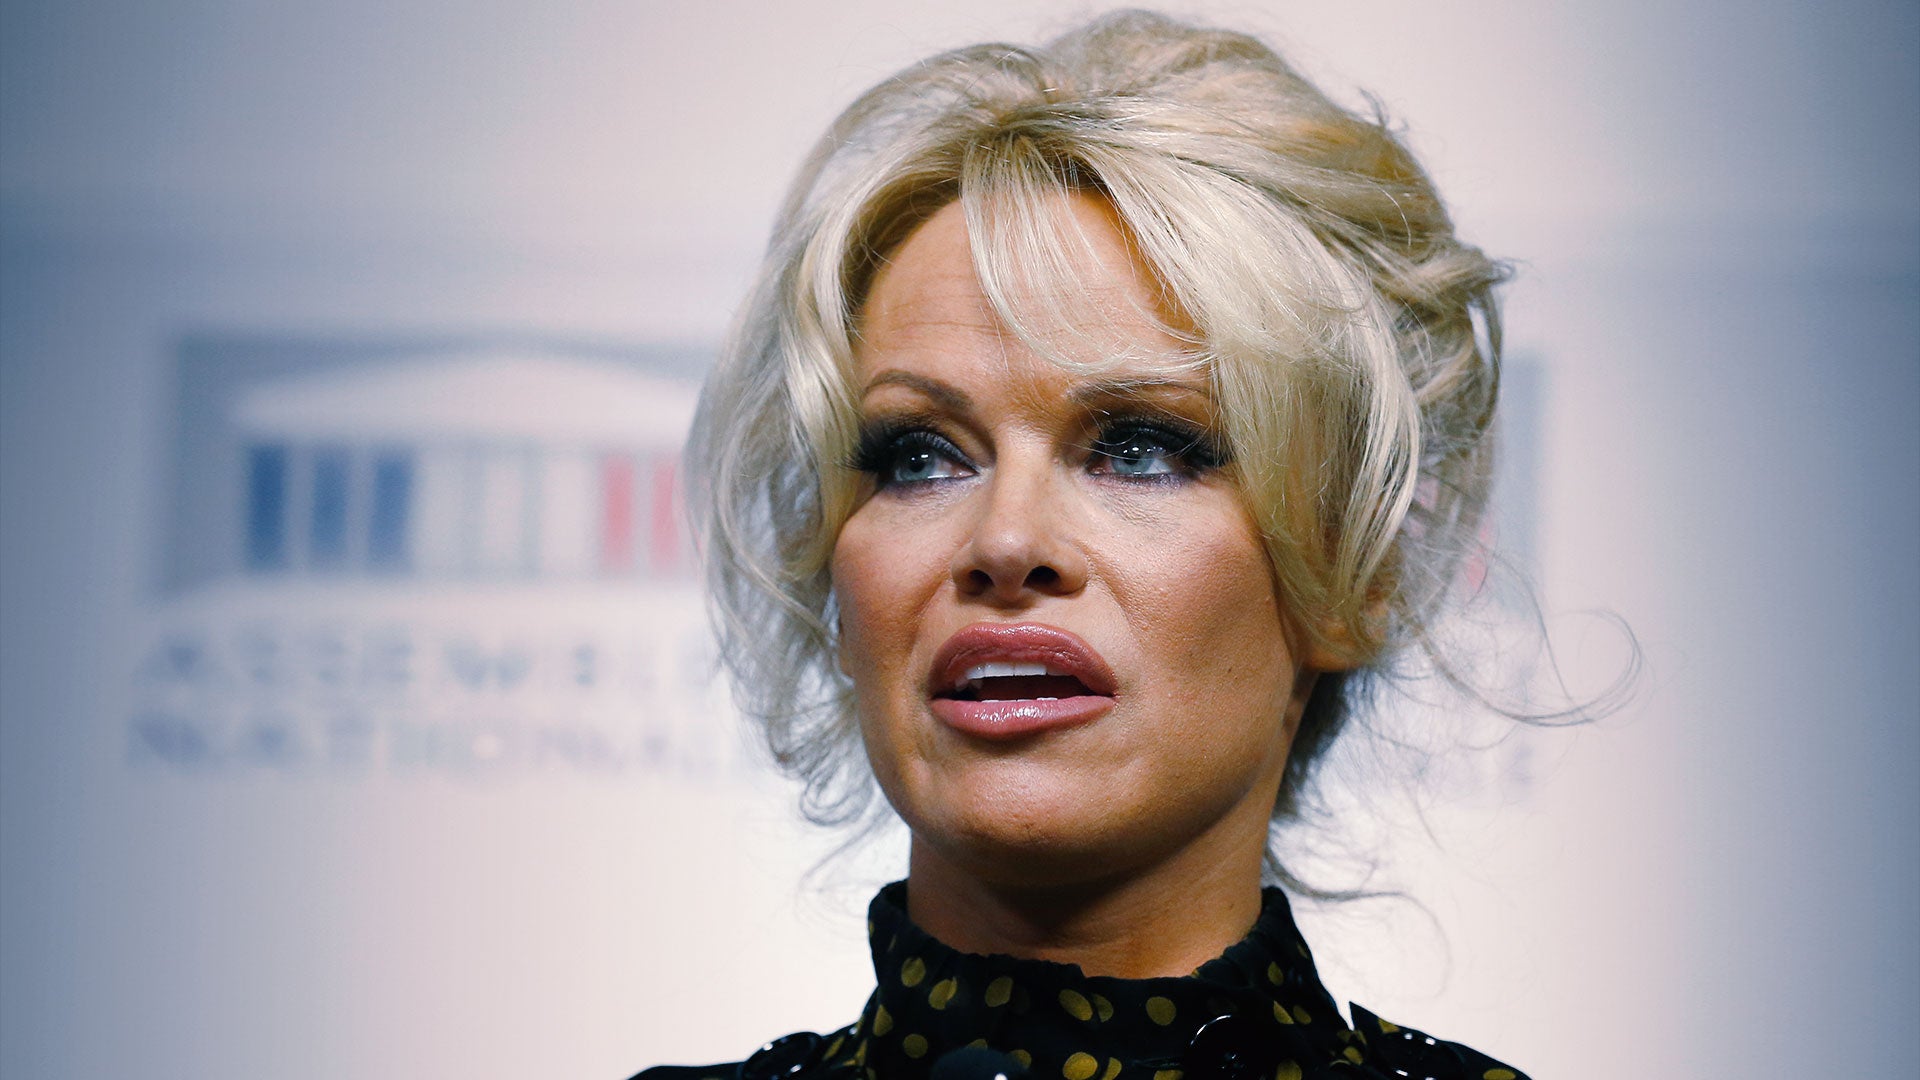 Nudist Hdv - Playboy Girl Pamela Anderson: 'Porn Is For Losers' | CBN News